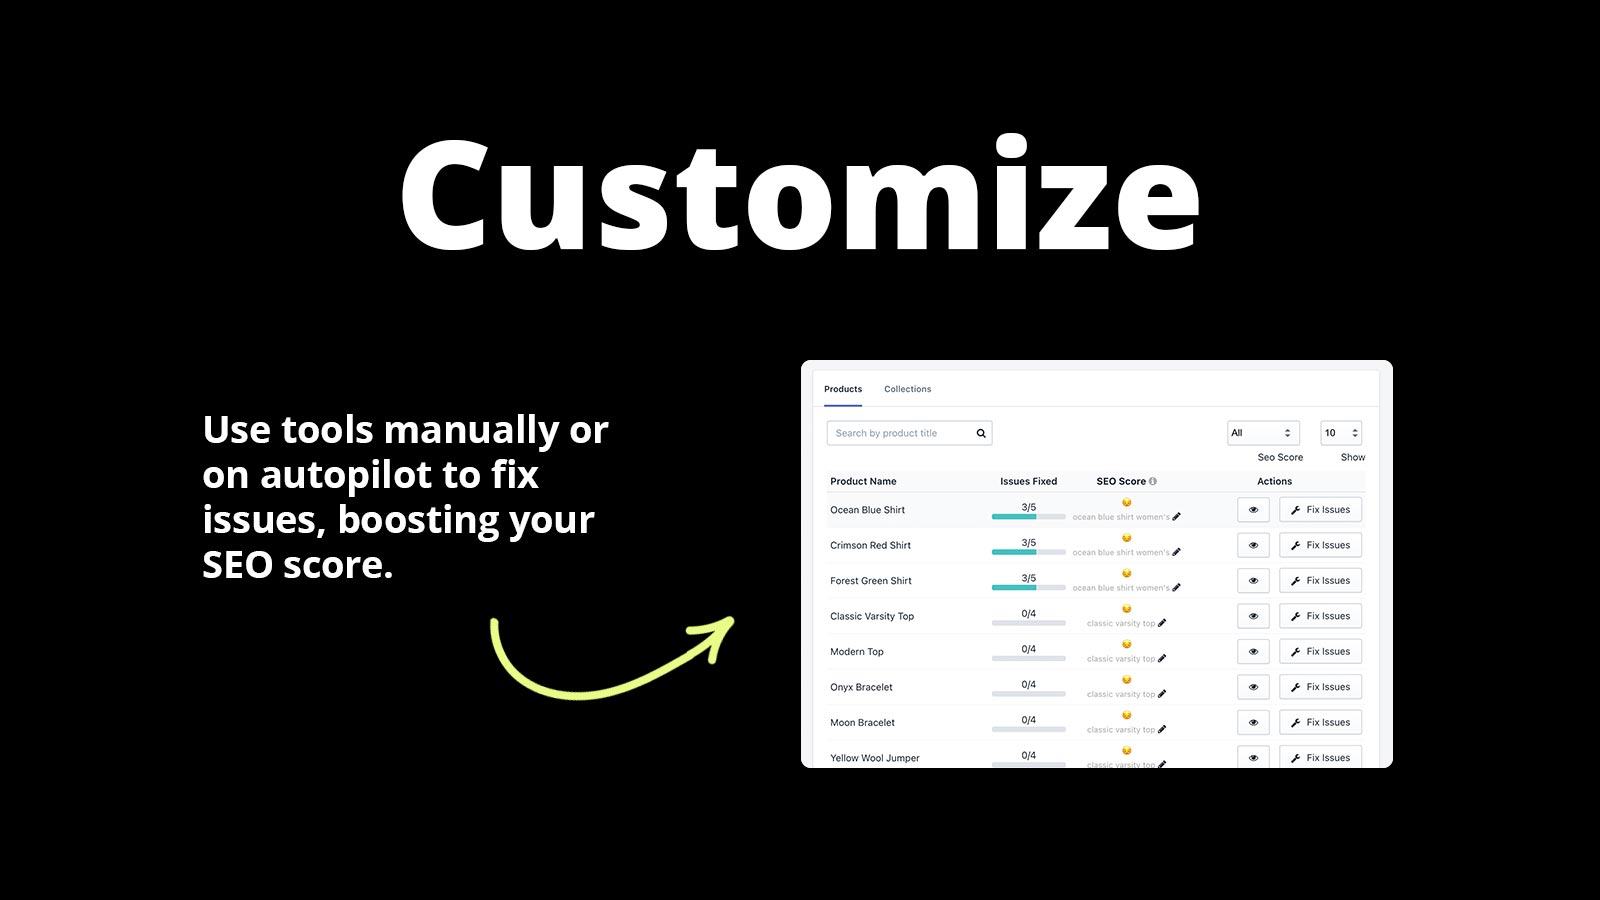 Customize. Use tools manually or on autopilot to fix issues, boosting your SEO score.